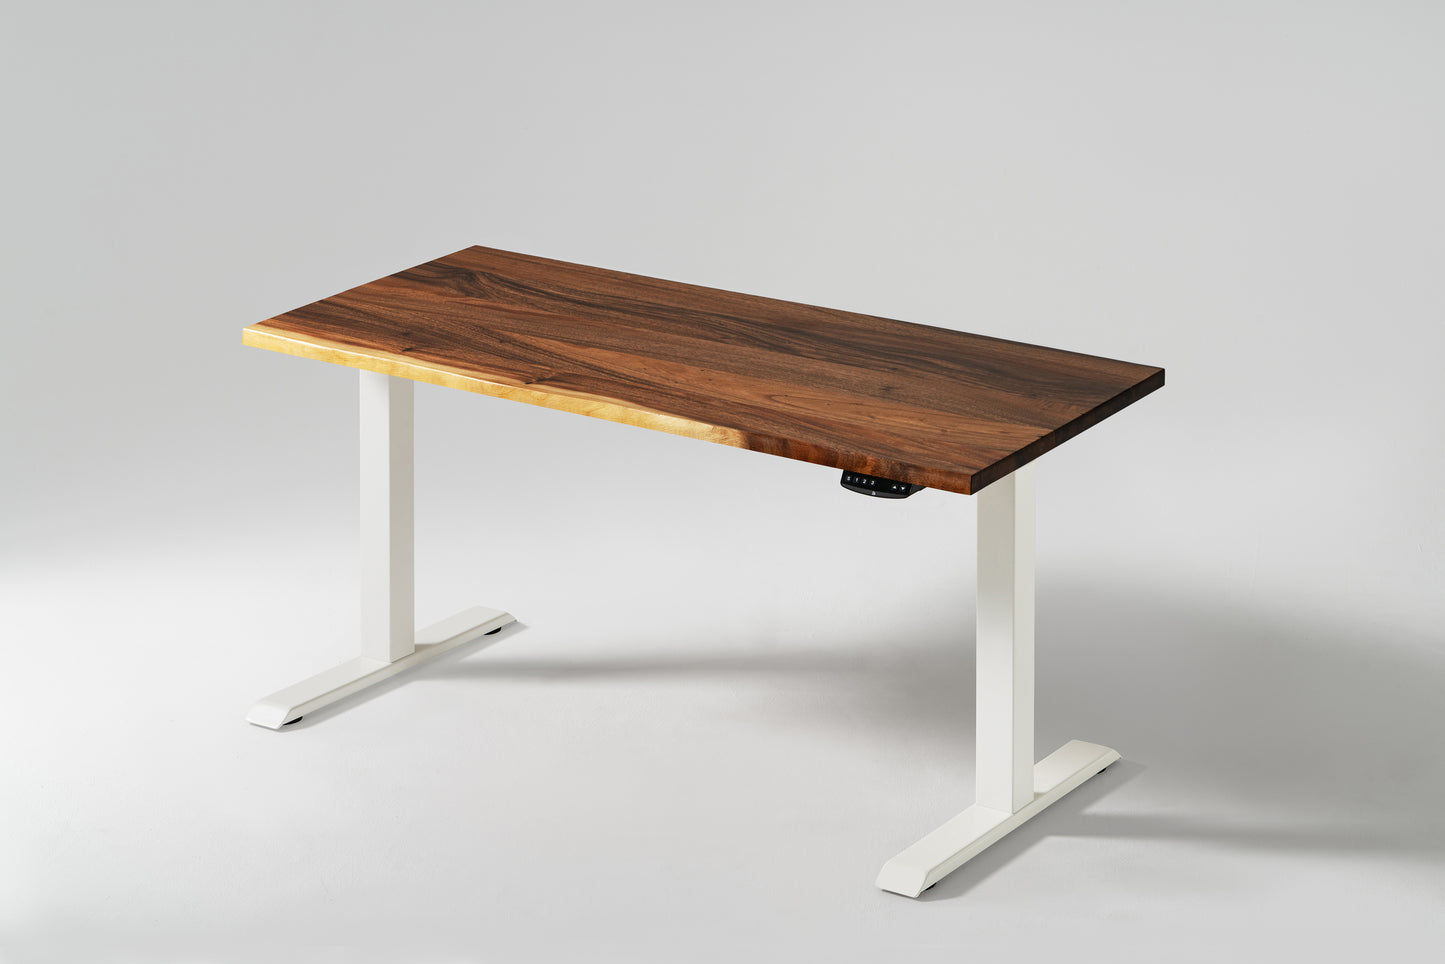 Elephant Desks - Height Adjustable Live Edge Standing Desk - Wavy Series (Solid Wood and A Live Edge)